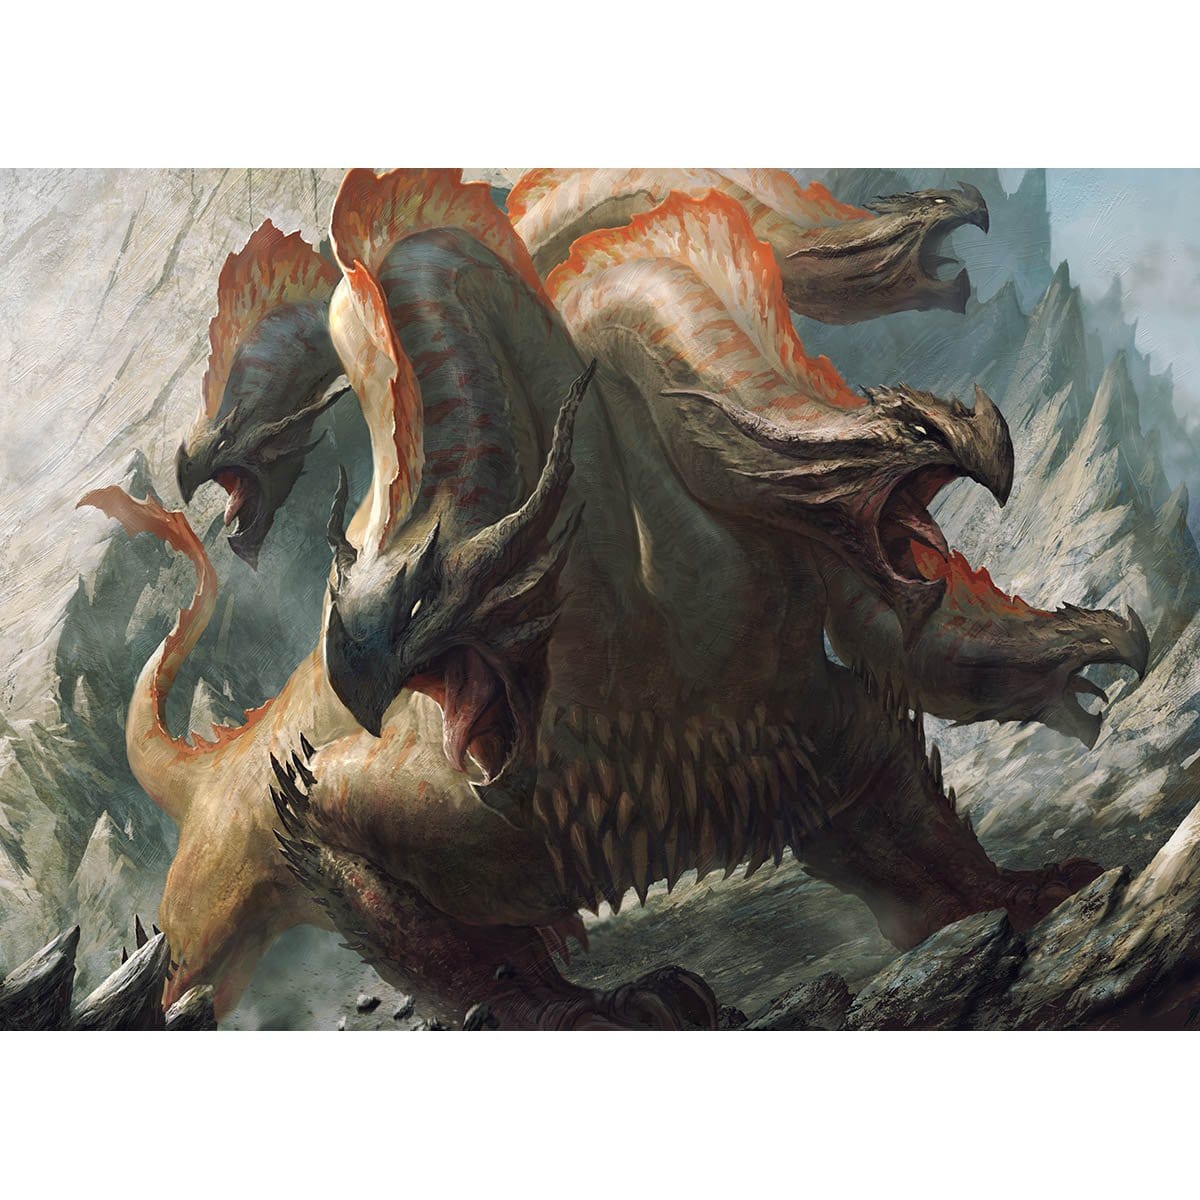 Polukranos, World Eater Print - Print - Original Magic Art - Accessories for Magic the Gathering and other card games